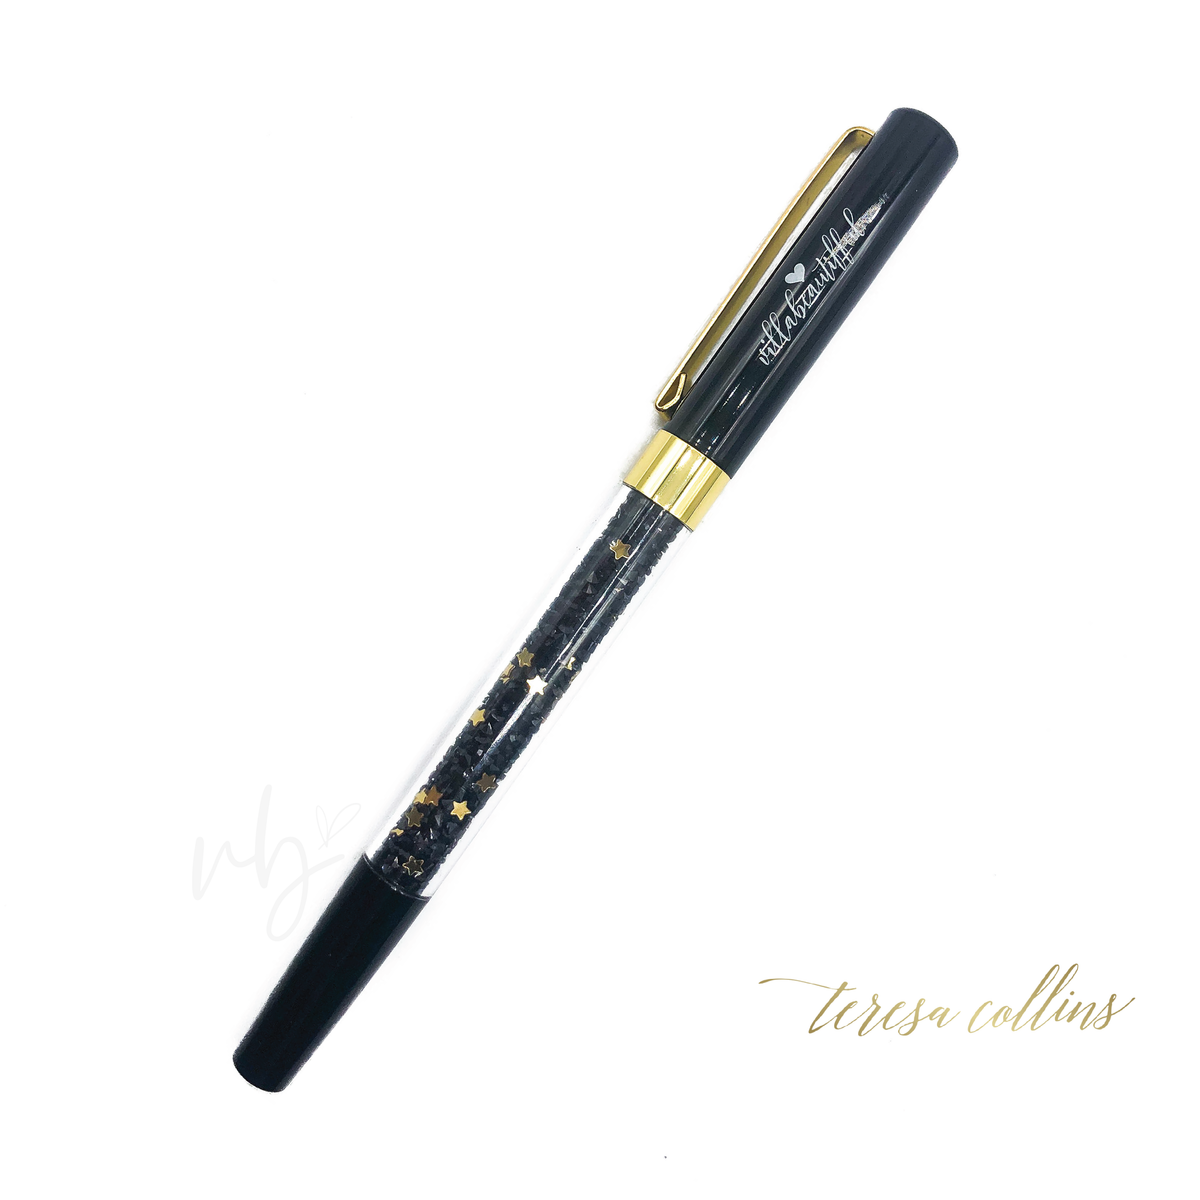 Extra Sparkly Imperfect Crystal VBPen | limited